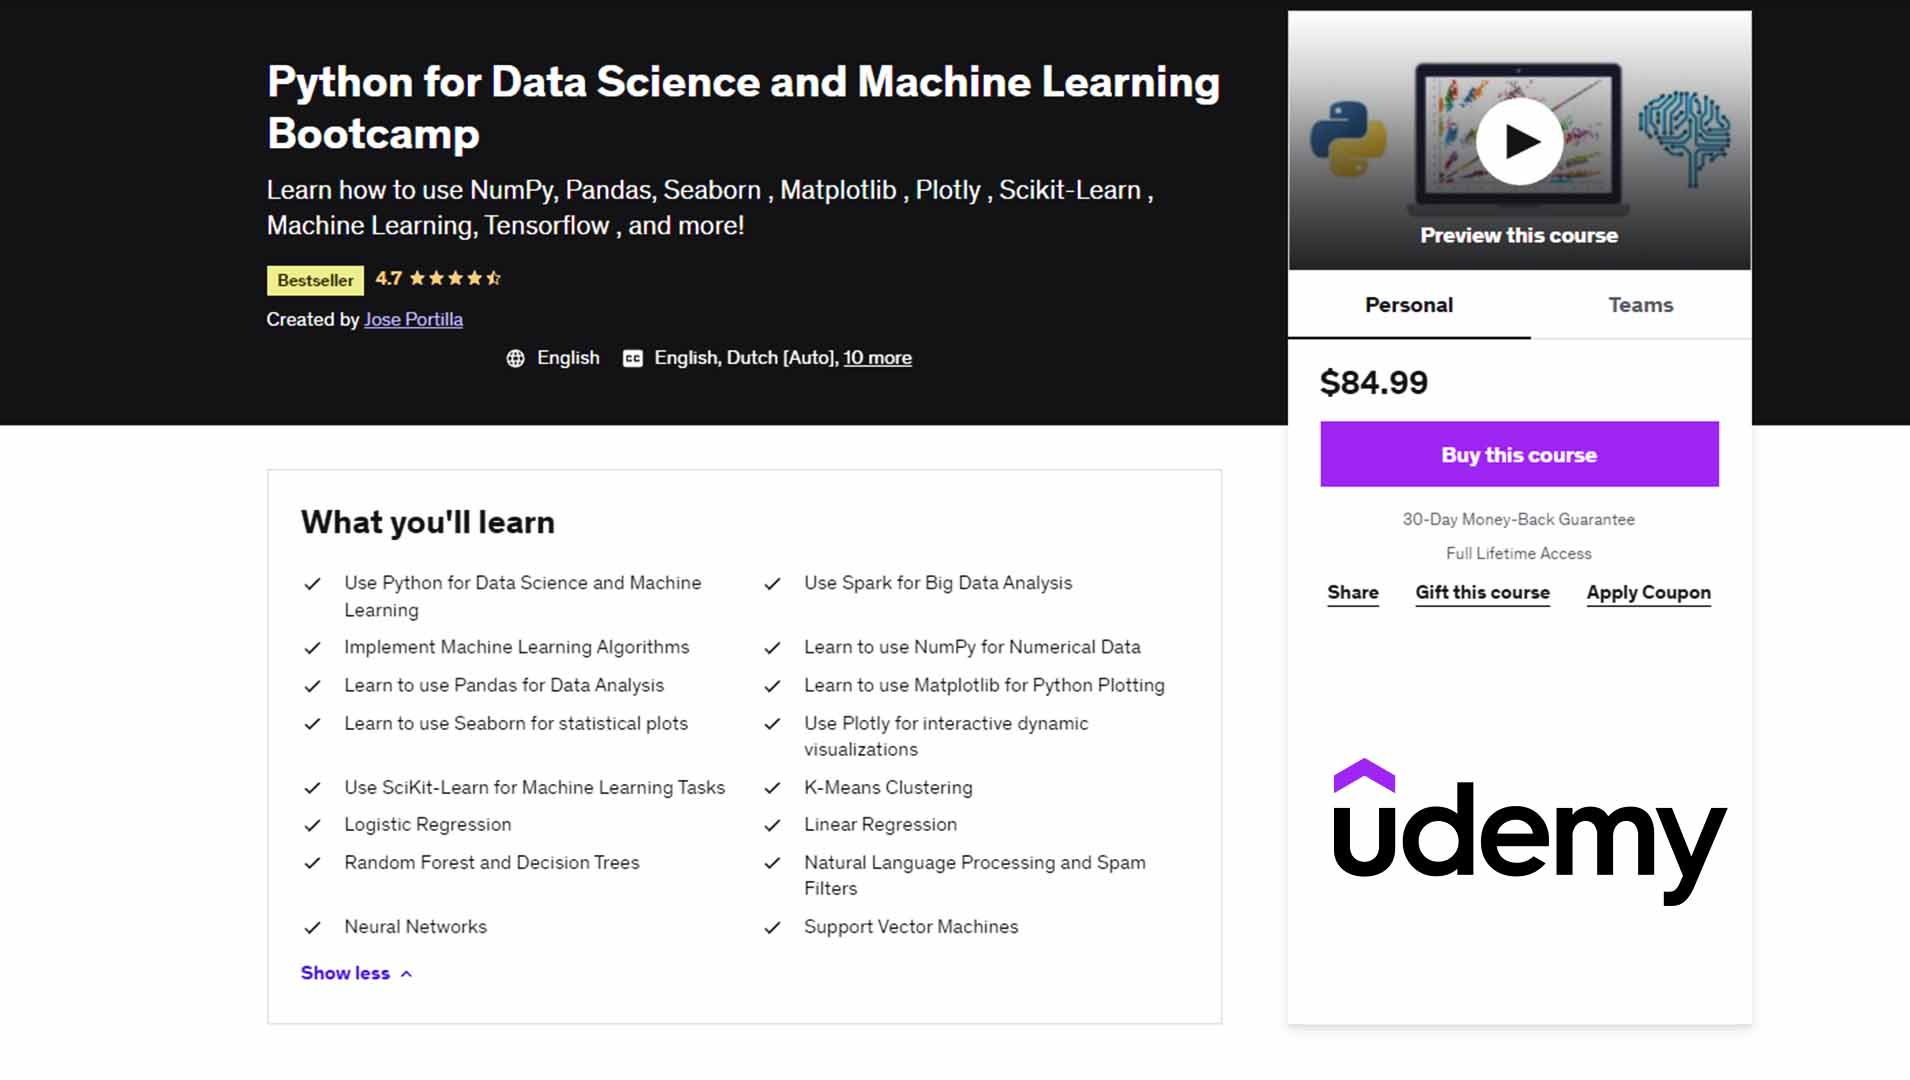 Python for Data Science and Machine Learning Bootcamp